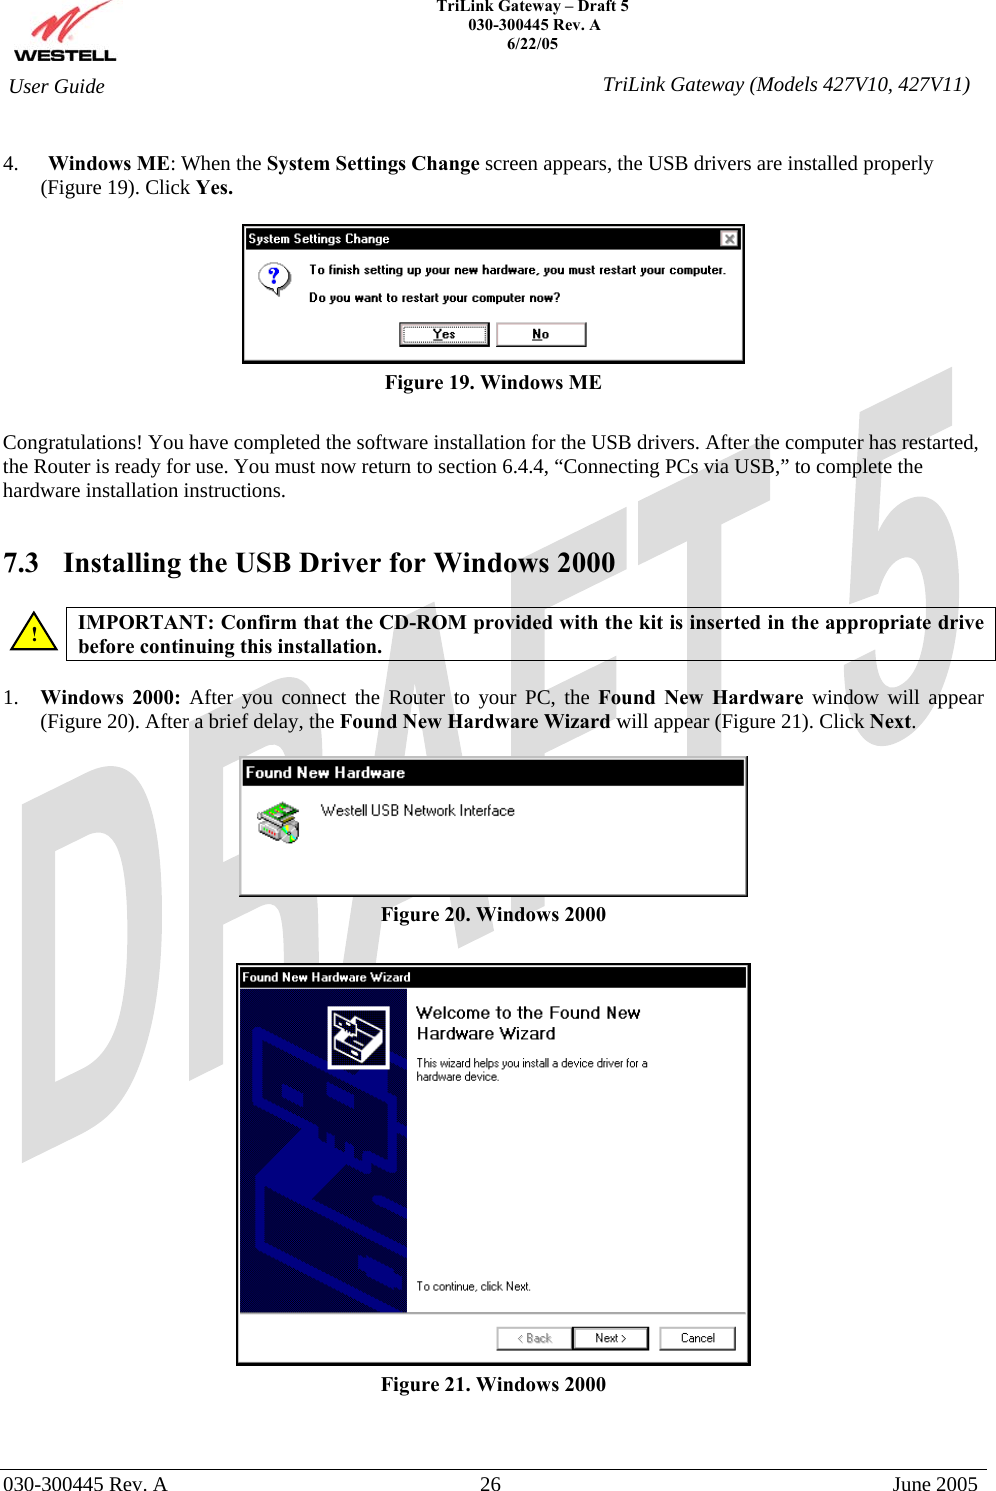    TriLink Gateway – Draft 5   030-300445 Rev. A 6/22/05   030-300445 Rev. A  26  June 2005  User Guide  TriLink Gateway (Models 427V10, 427V11) 4.  Windows ME: When the System Settings Change screen appears, the USB drivers are installed properly (Figure 19). Click Yes.   Figure 19. Windows ME  Congratulations! You have completed the software installation for the USB drivers. After the computer has restarted, the Router is ready for use. You must now return to section 6.4.4, “Connecting PCs via USB,” to complete the hardware installation instructions.  7.3  Installing the USB Driver for Windows 2000   IMPORTANT: Confirm that the CD-ROM provided with the kit is inserted in the appropriate drive before continuing this installation.   1.  Windows 2000: After you connect the Router to your PC, the Found New Hardware window will appear (Figure 20). After a brief delay, the Found New Hardware Wizard will appear (Figure 21). Click Next.    Figure 20. Windows 2000   Figure 21. Windows 2000  ! 